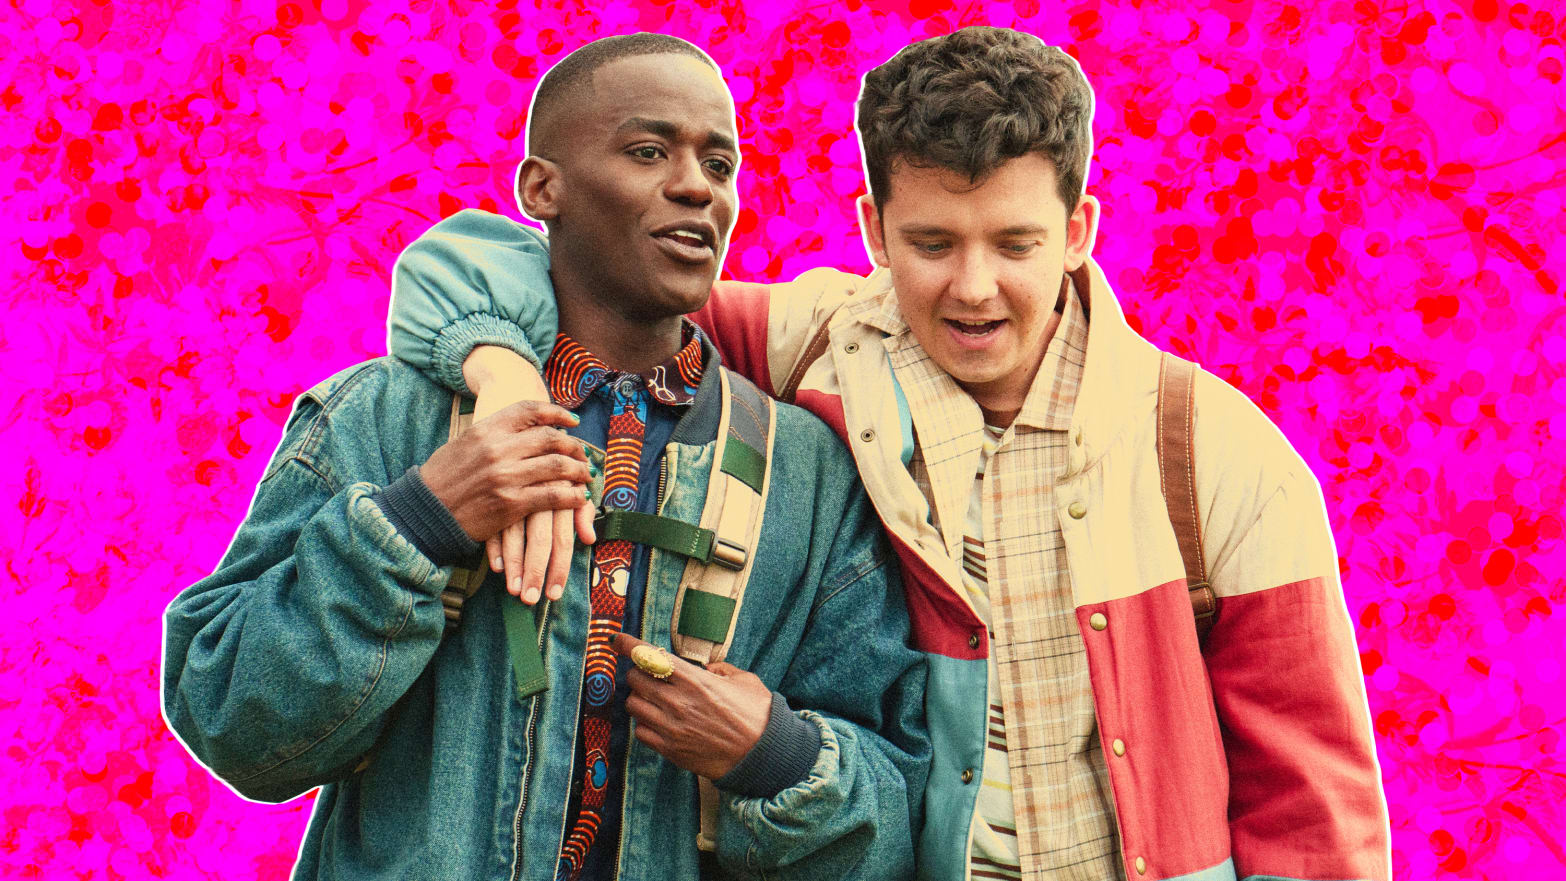 A photo illustration of Ncuti Gatwa as Eric and Asa Butterfield as Otis in Sex Education.